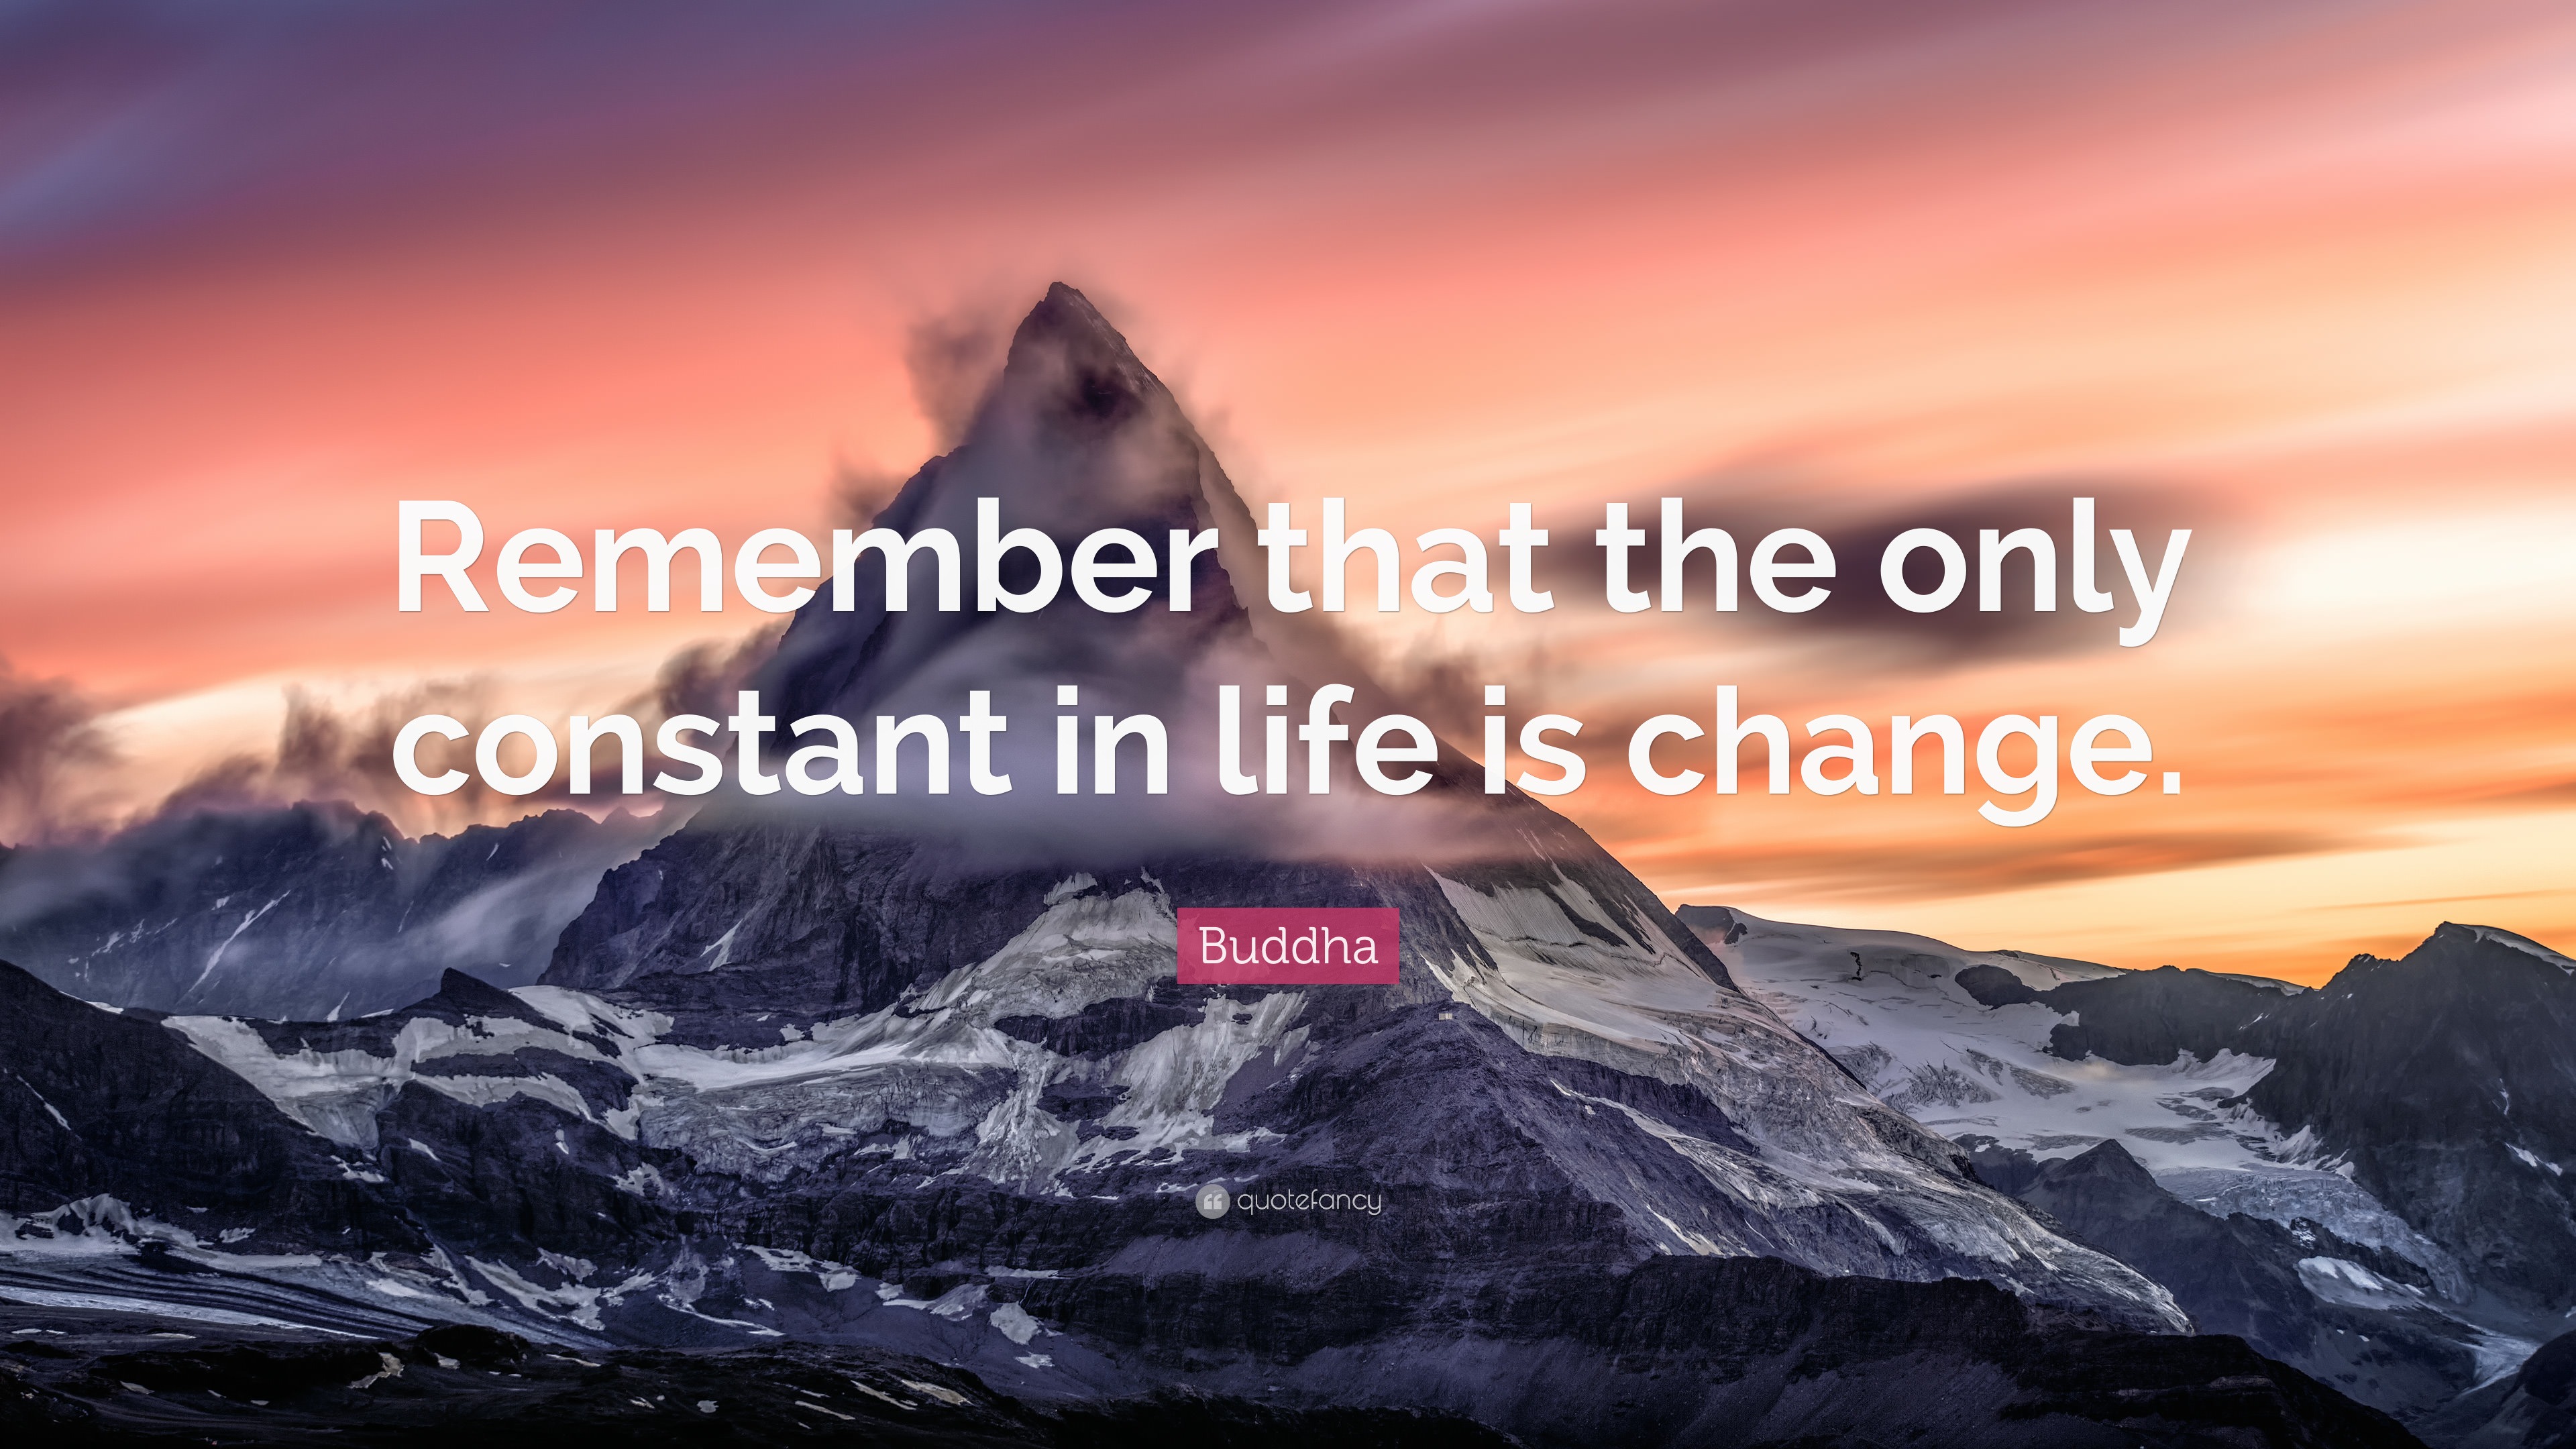 Buddha Quote “Remember that the only constant in life is change ”